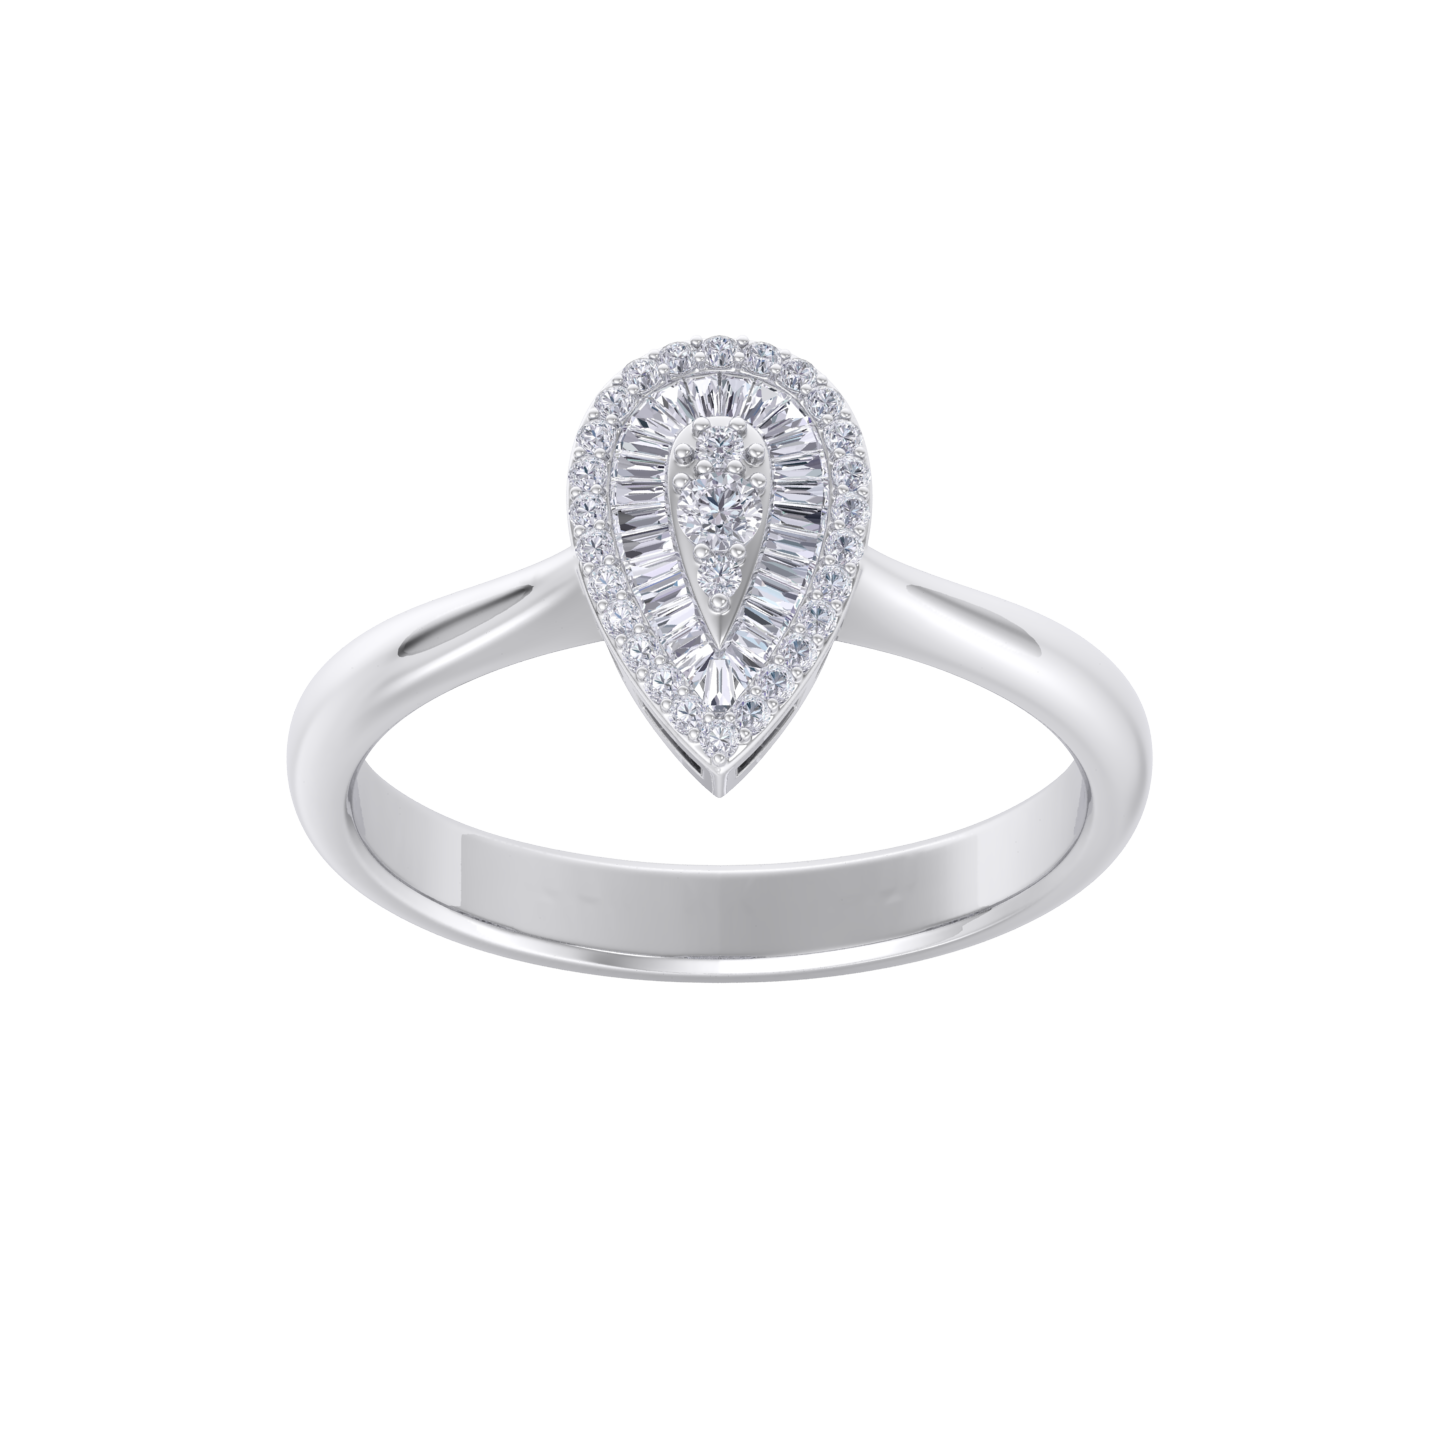 Diamond ring in white gold with white diamonds of 0.39 ct in weight